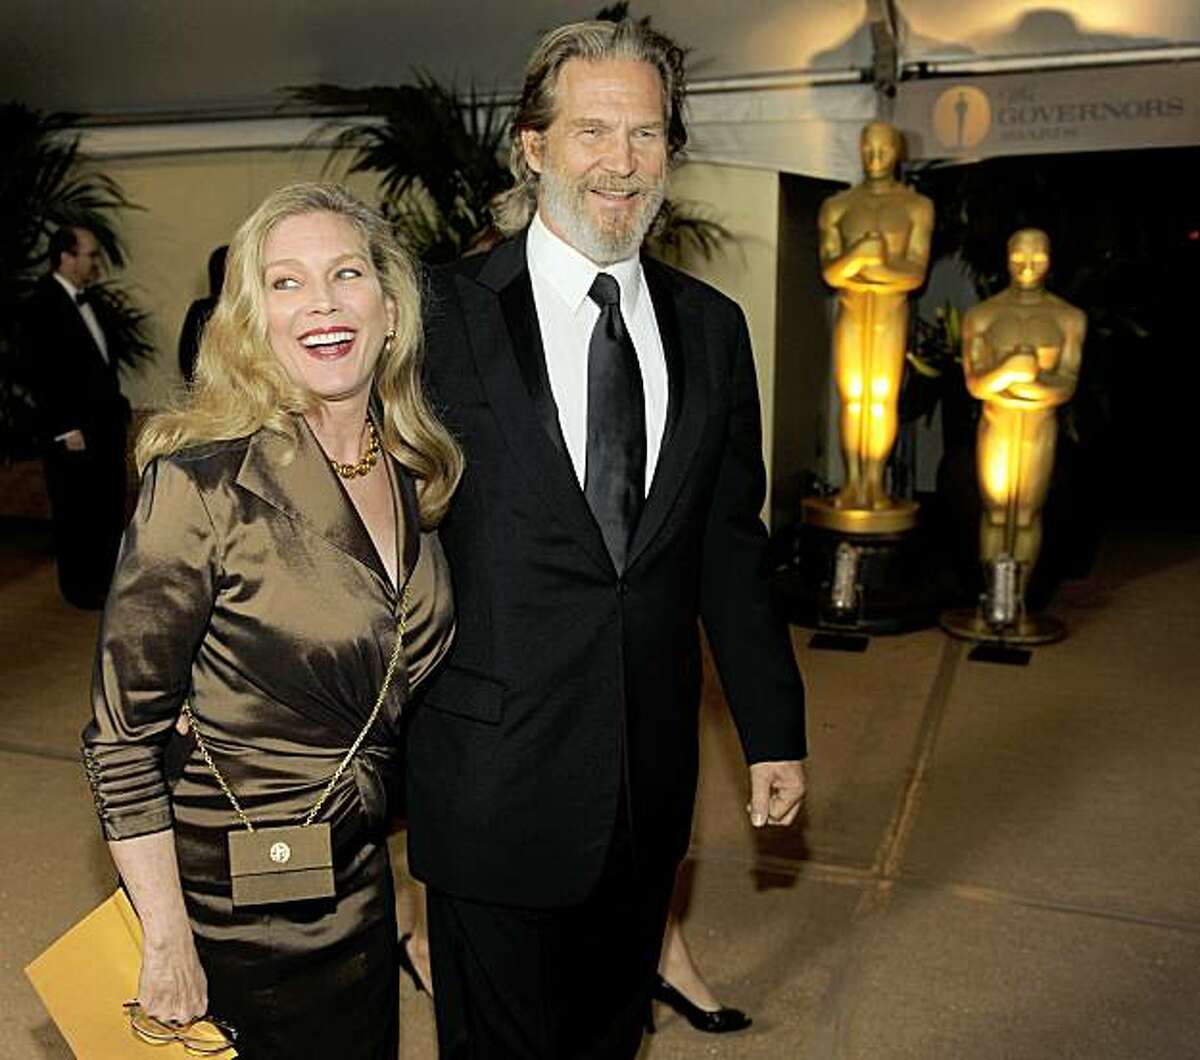 Actor Jeff Bridges and his wife Susan sold their Montecito, Calif. home for $15.93 million.